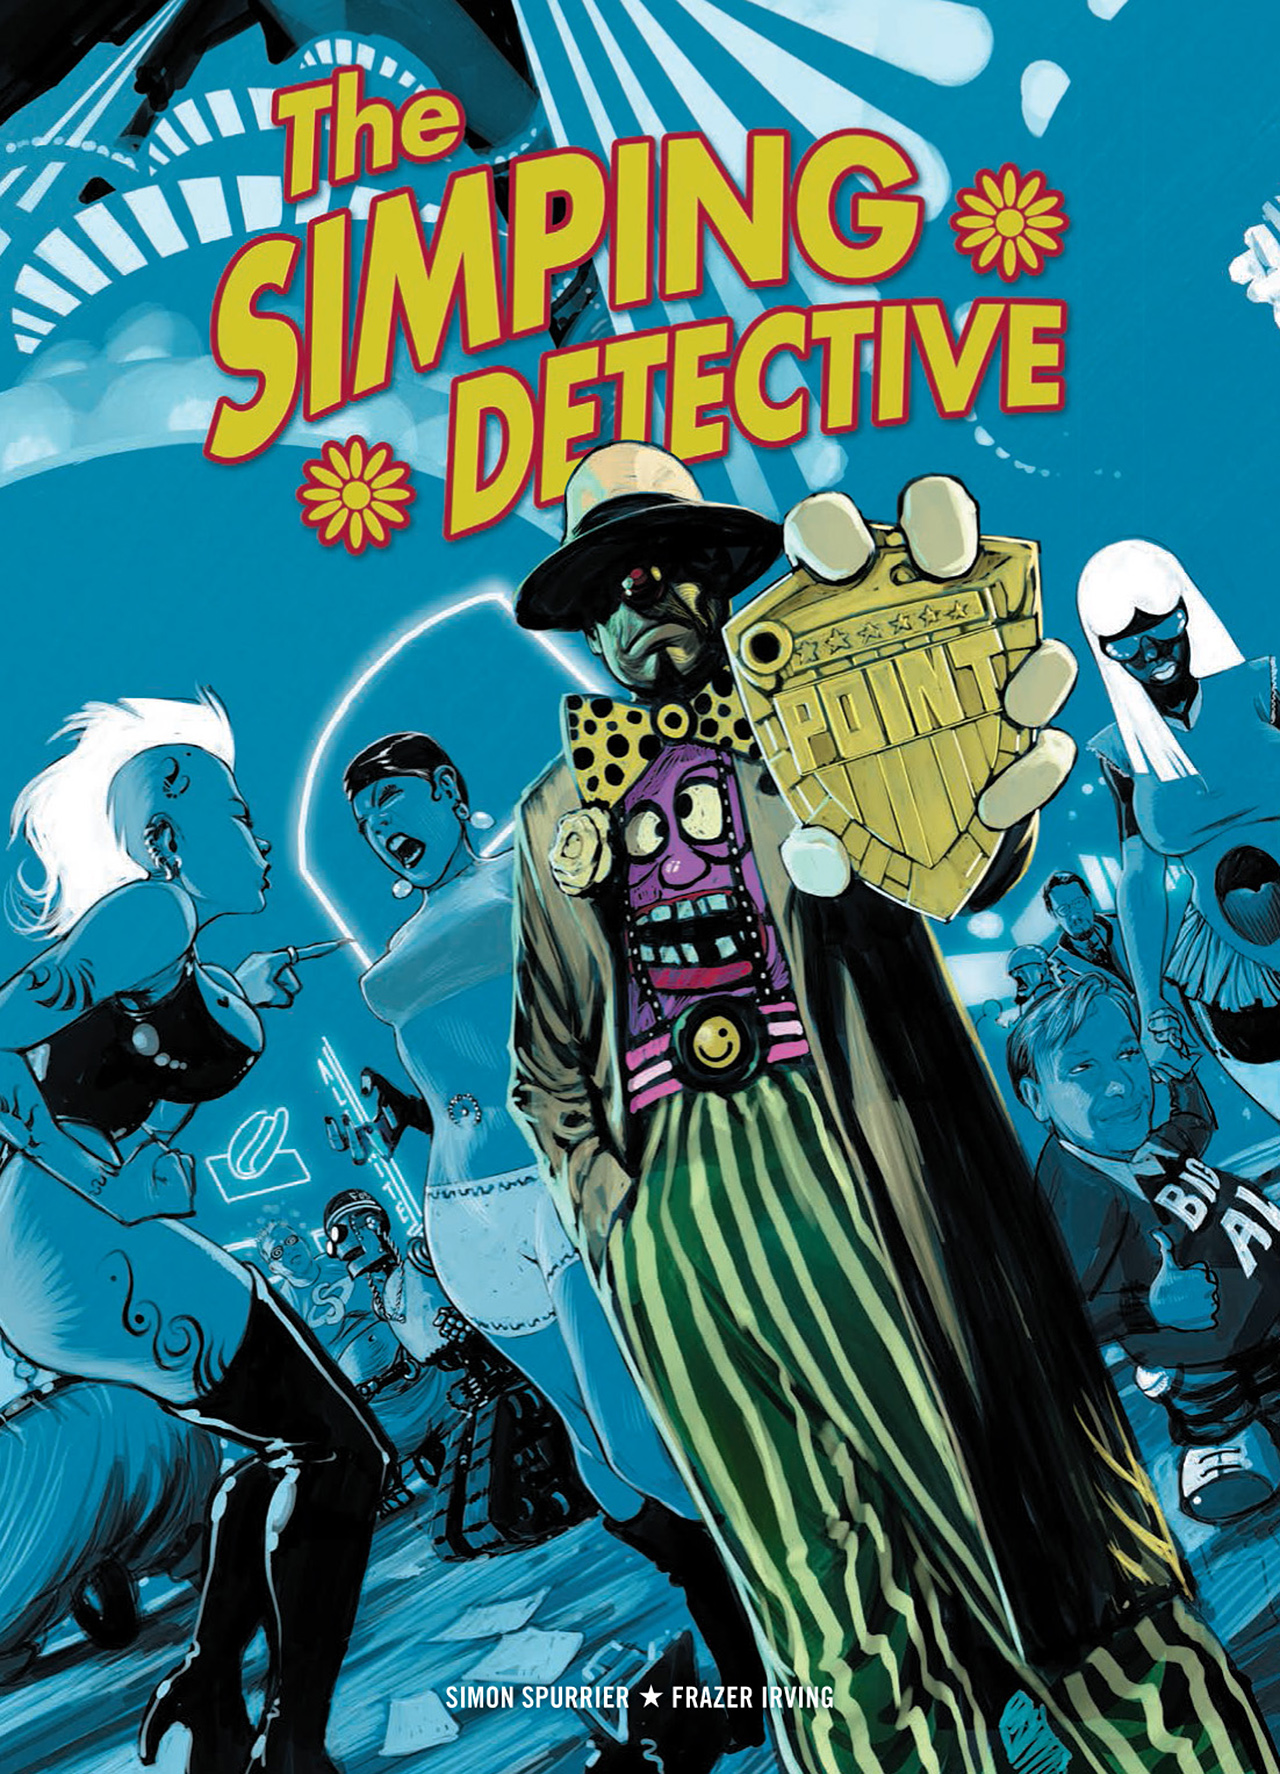 Read online The Simping Detective comic -  Issue # TPB - 1